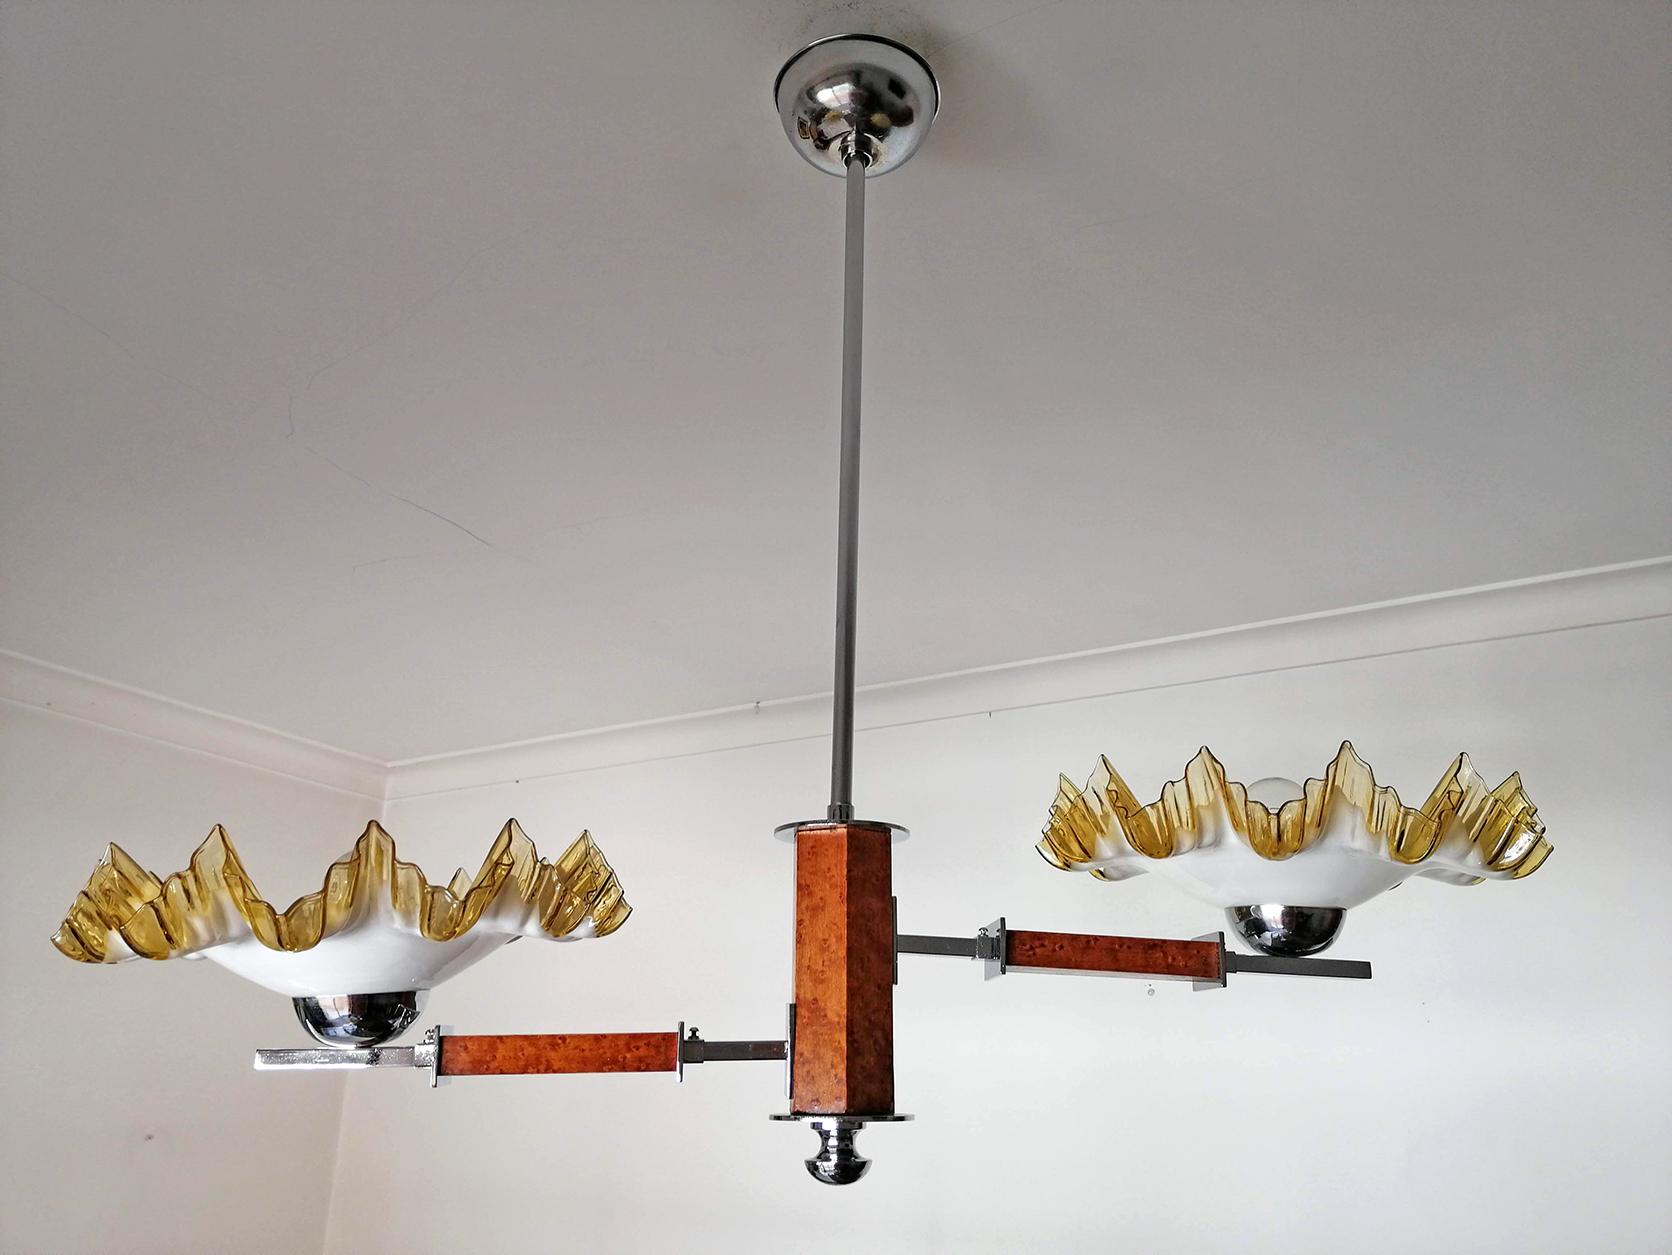 20th Century French Art Deco Opaline Ruffled Amber Art Glass Shades Wood & Chrome Chandelier For Sale